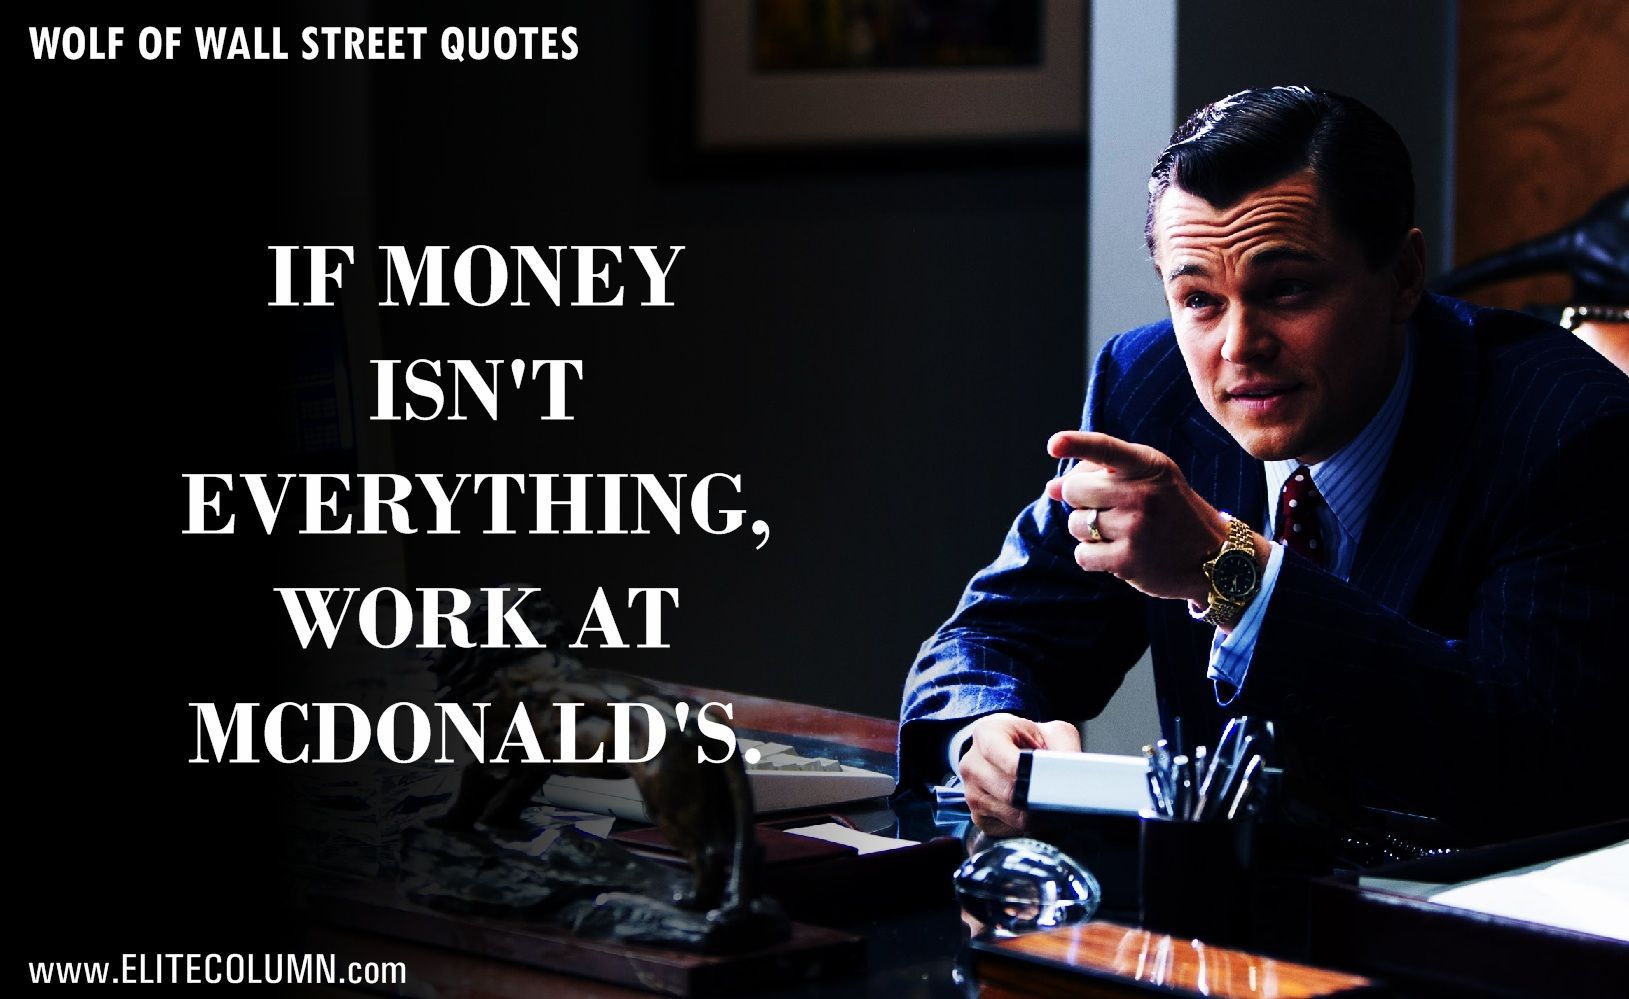 Wolf of Wall Street Quotes Wallpaper .wallpaperaccess.com